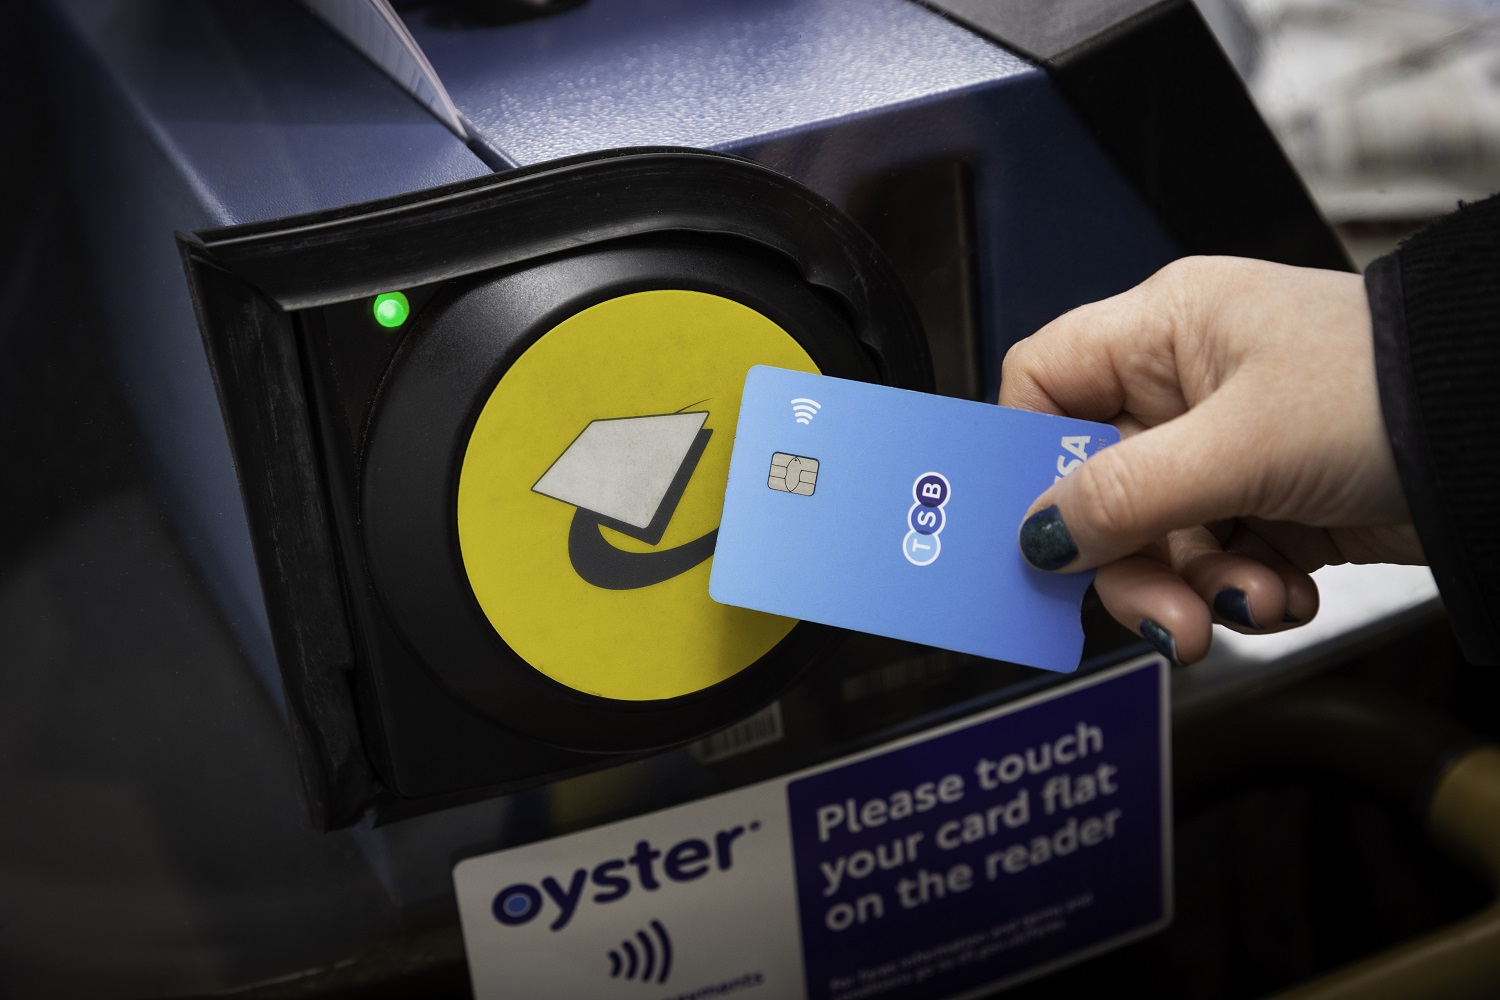 TfL celebrates decade of contactless payments